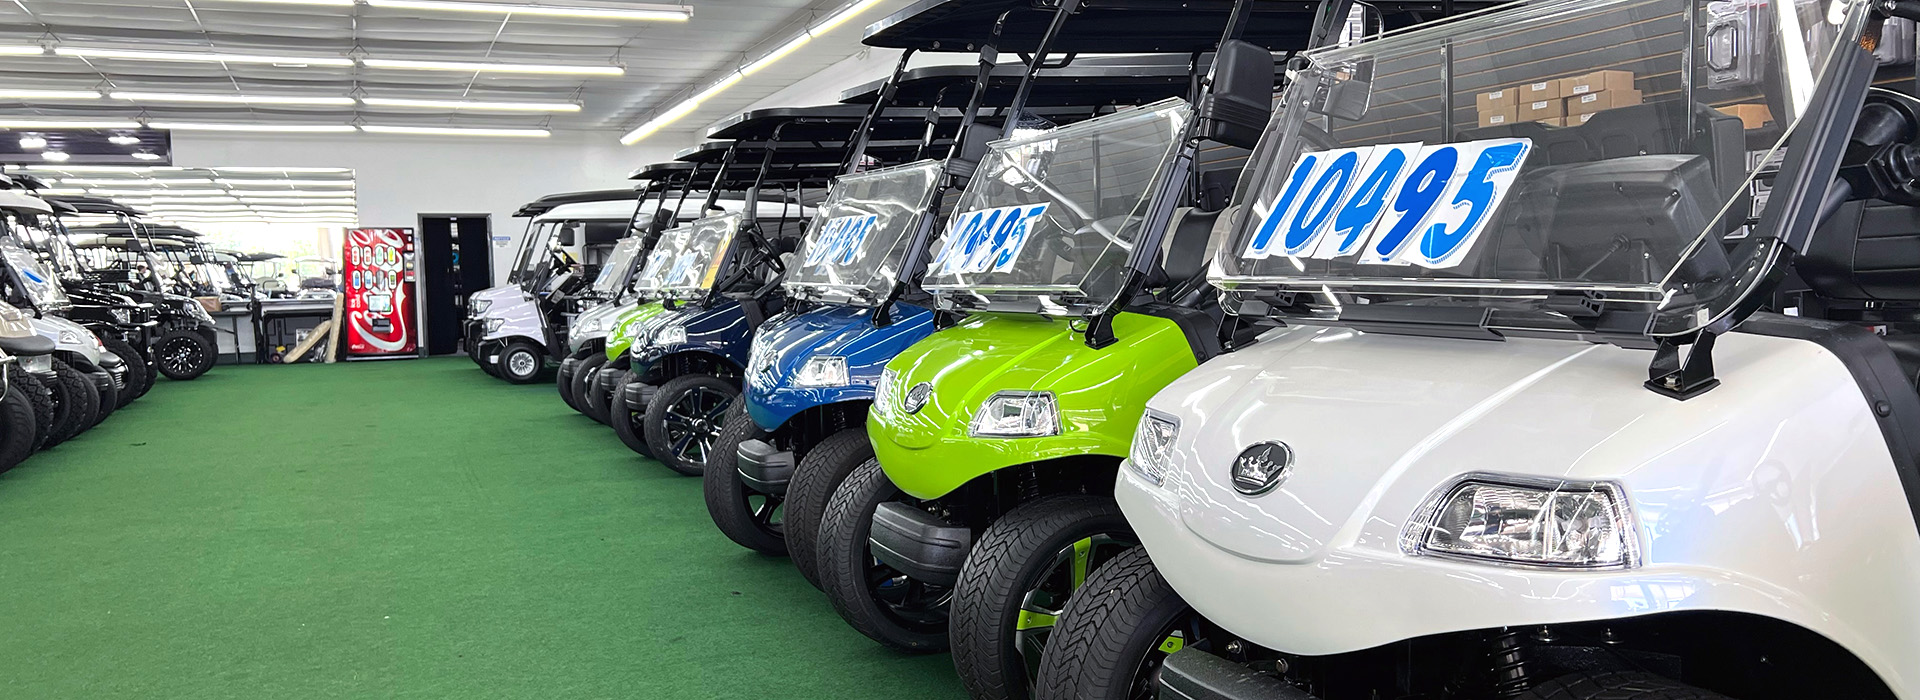 Tidewater_Carts_Golf_Cart_Superstore_02-22